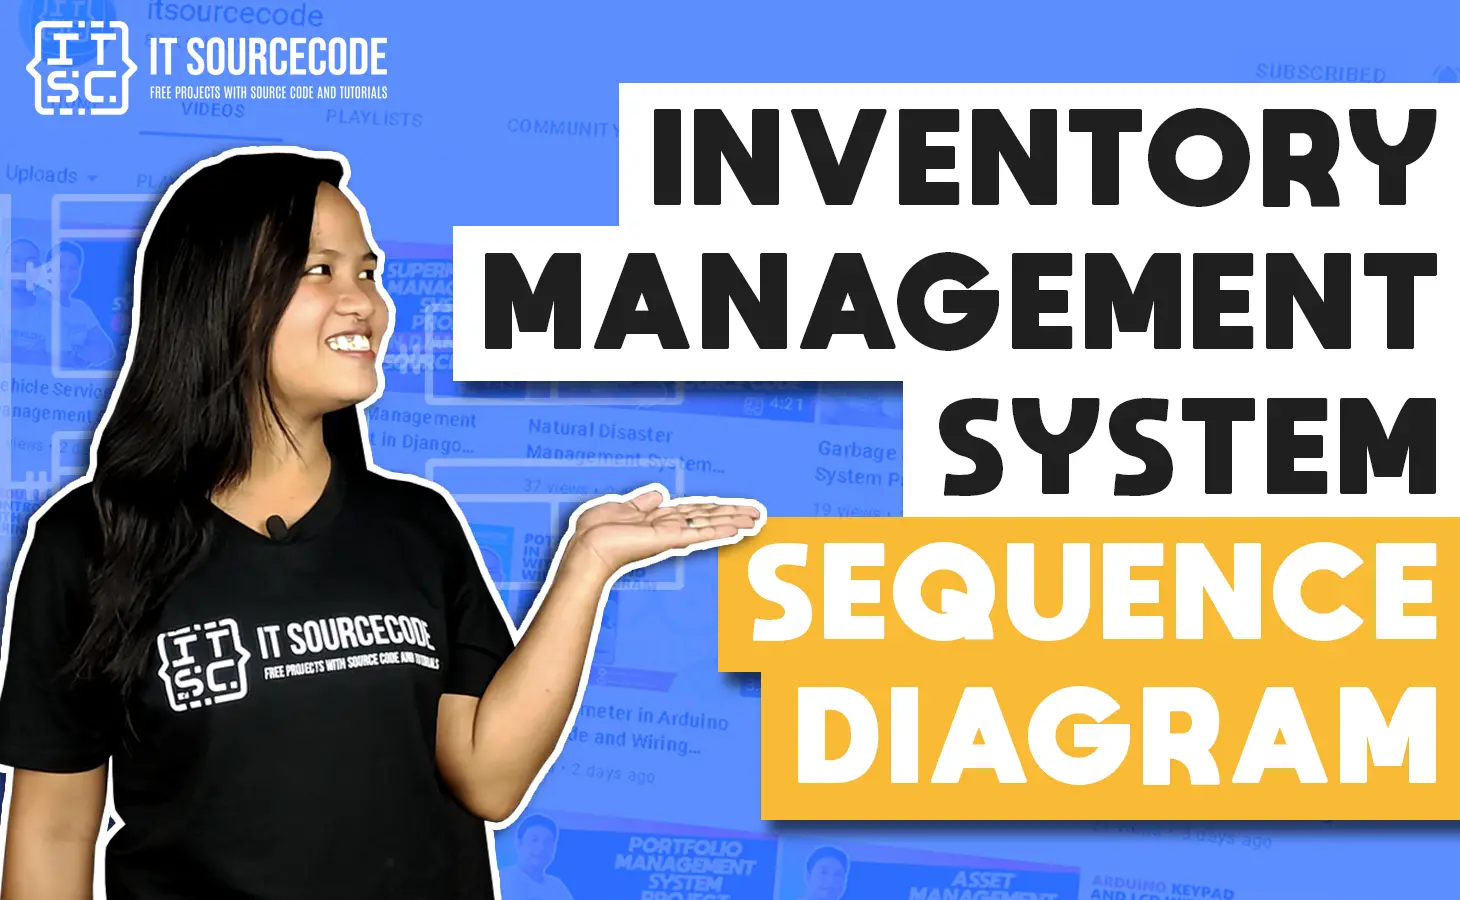 Sequence Diagram for Inventory Management System